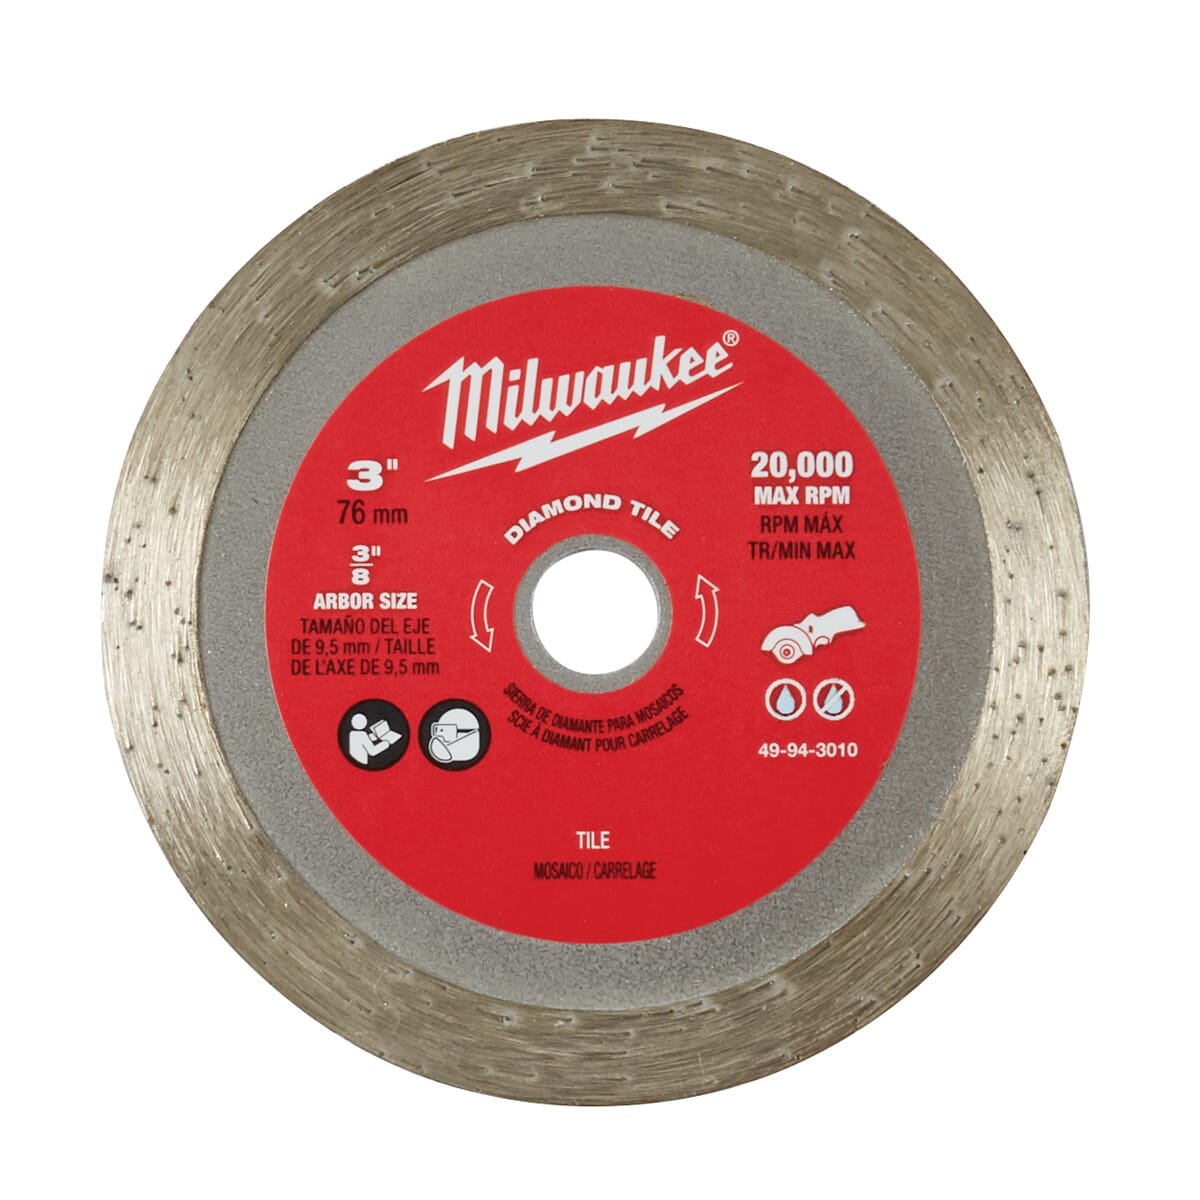 Milwaukee® 49-94-3010 Diamond Tile Blade, 3 in Dia Blade, 41/64 in D Cutting, 3/8 in Arbor/Shank, Wet/Dry Cutting